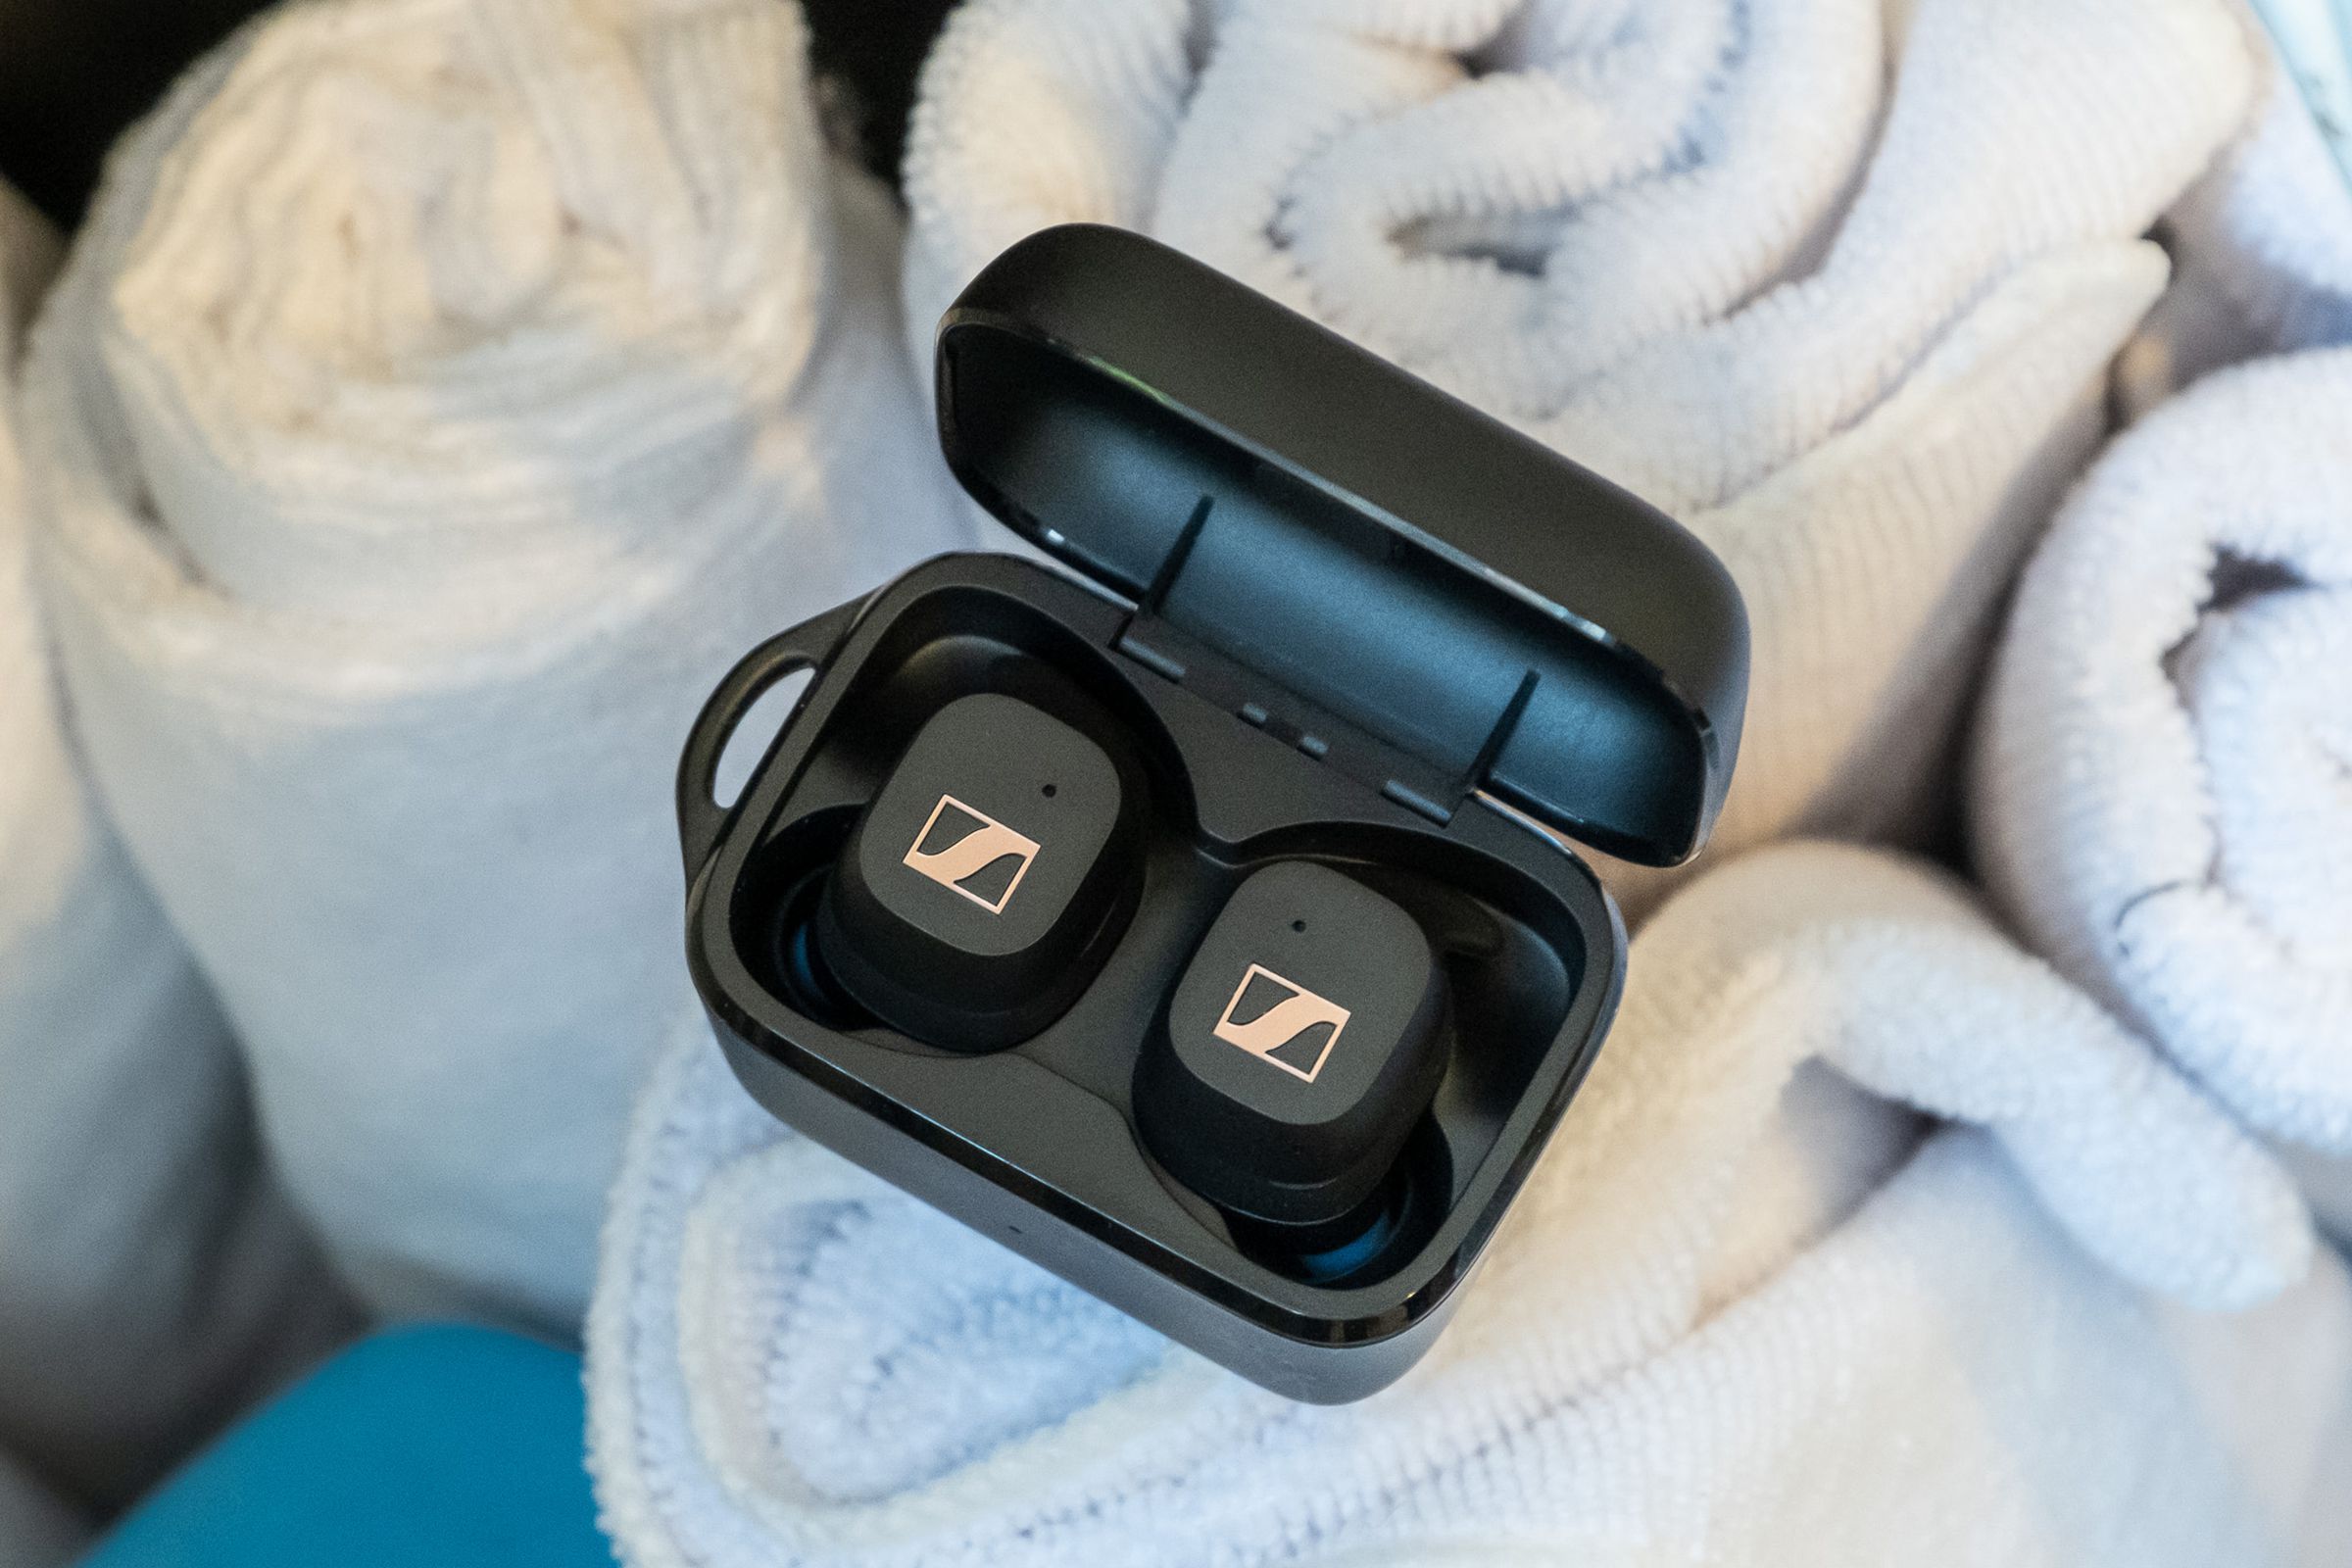 A photo of Sennheiser’s Sport Earbuds on several folded towels.